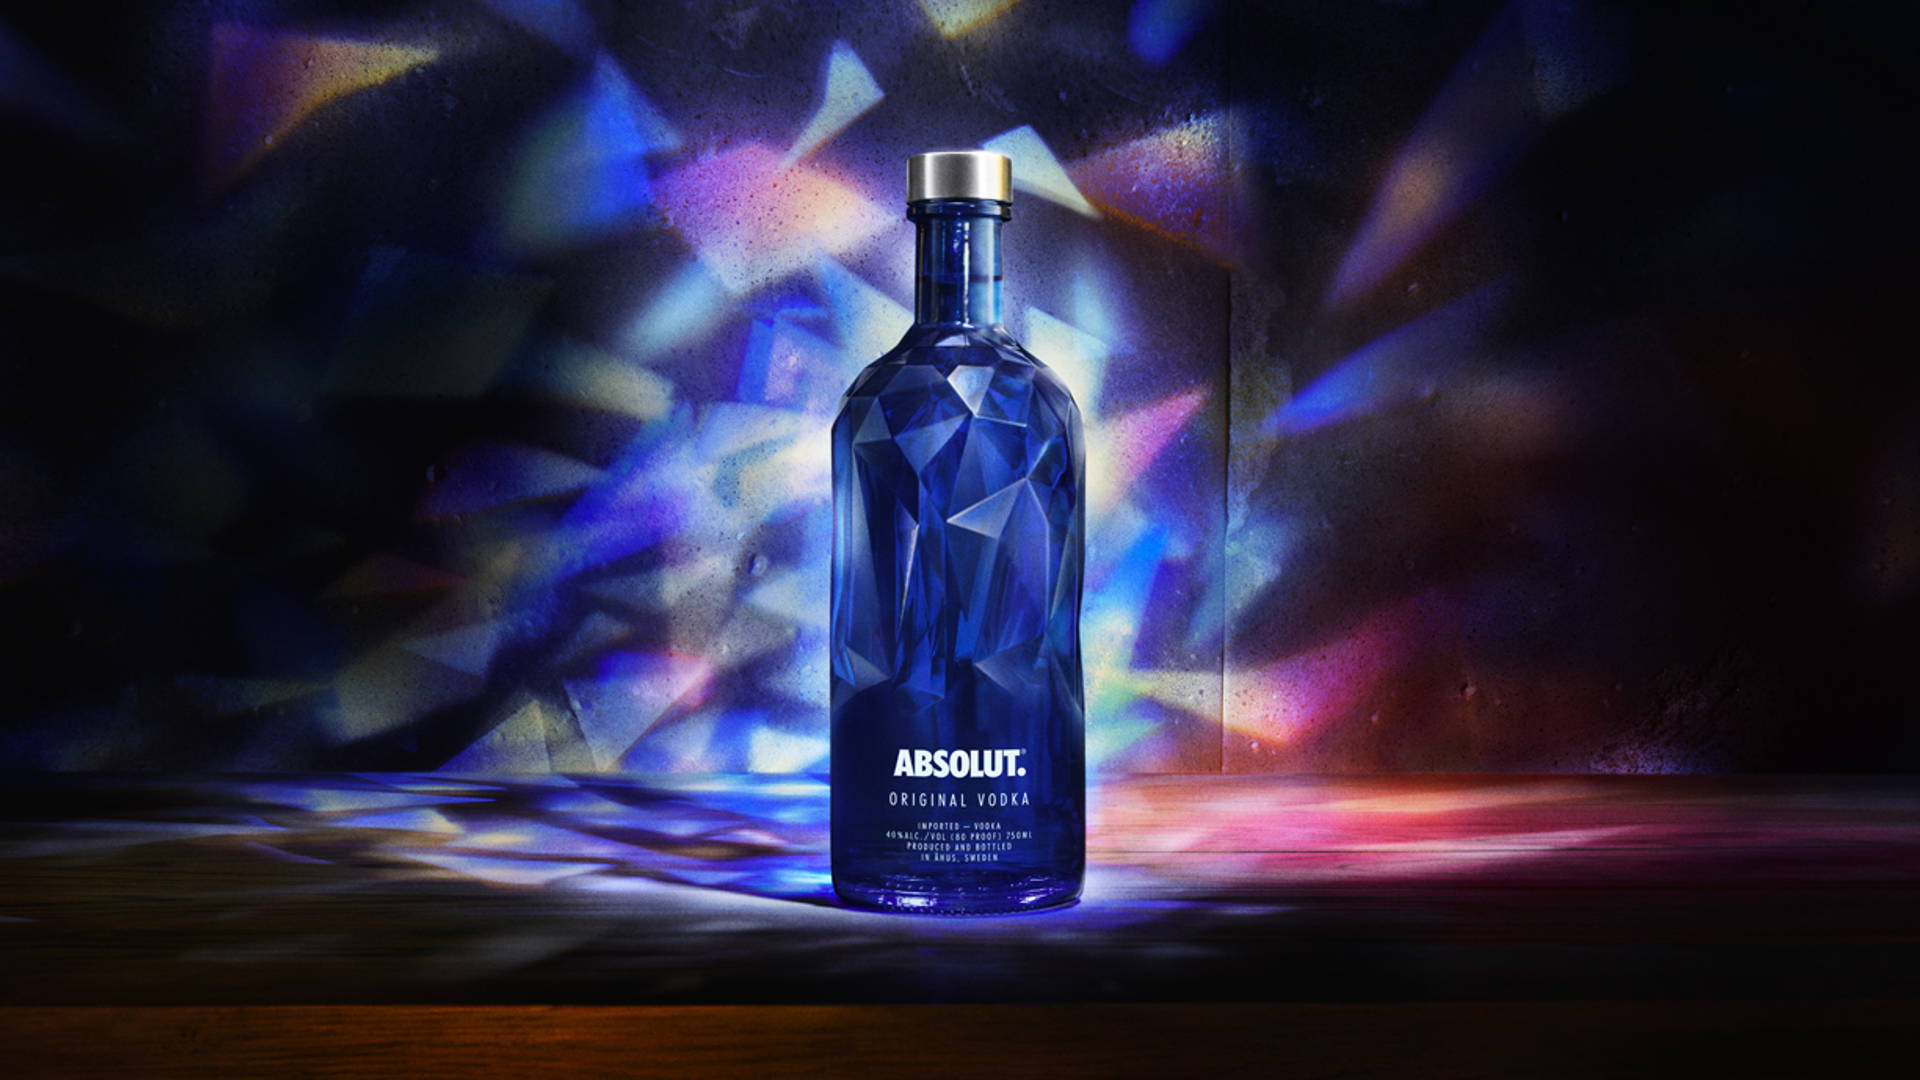 Get the holiday party started with a bottle of Absolut Facet